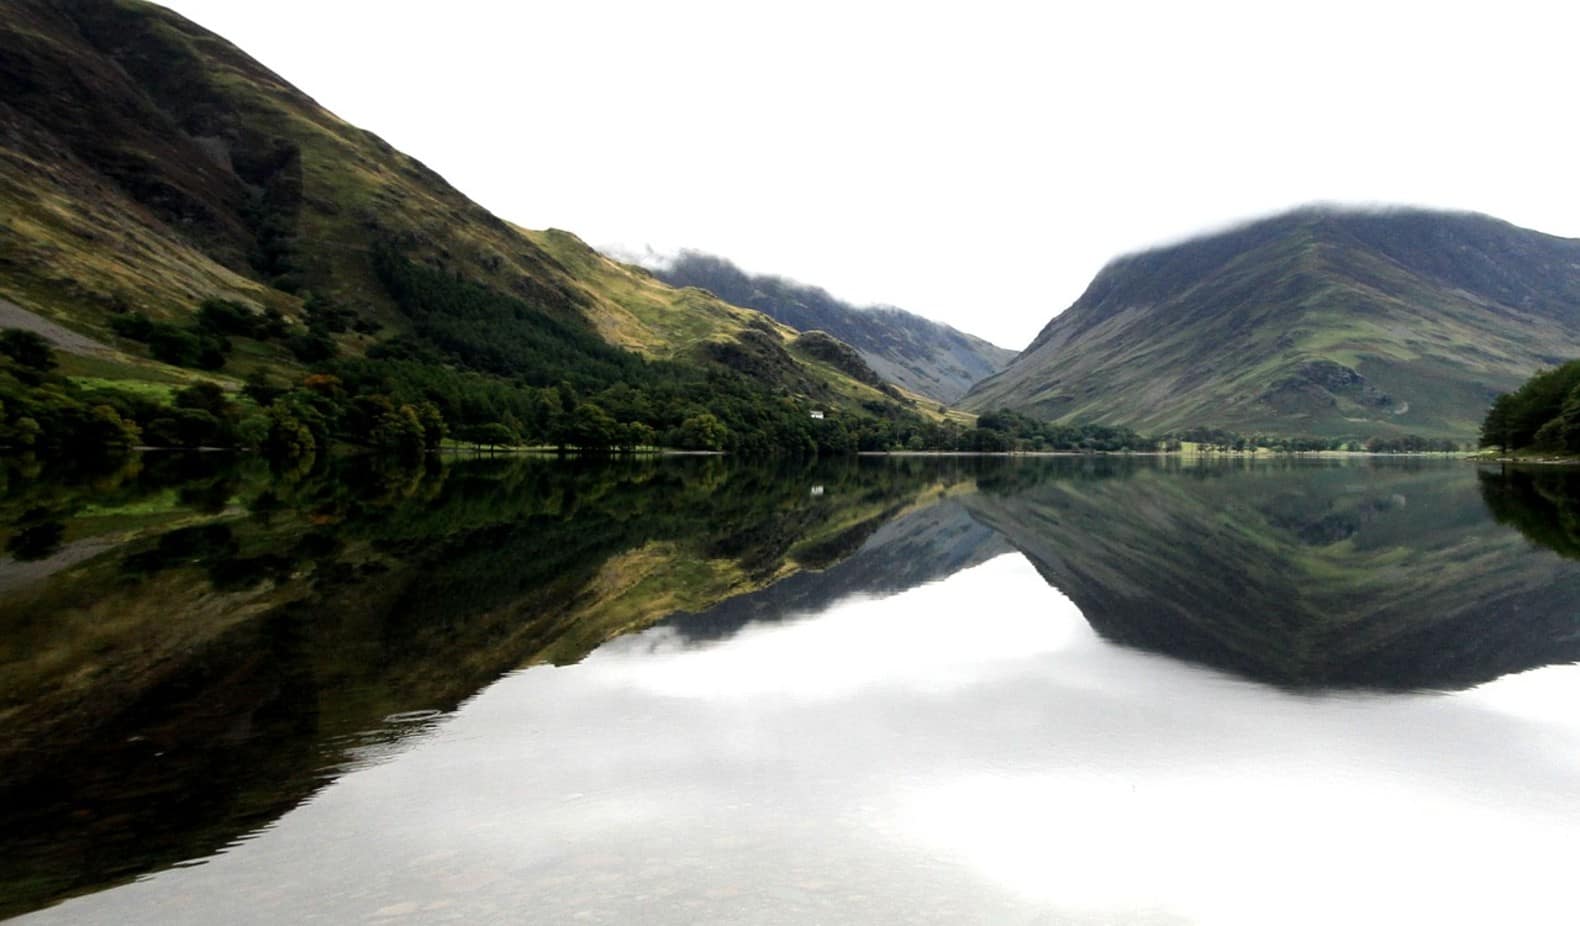 A view of Buttermere in the Lake District